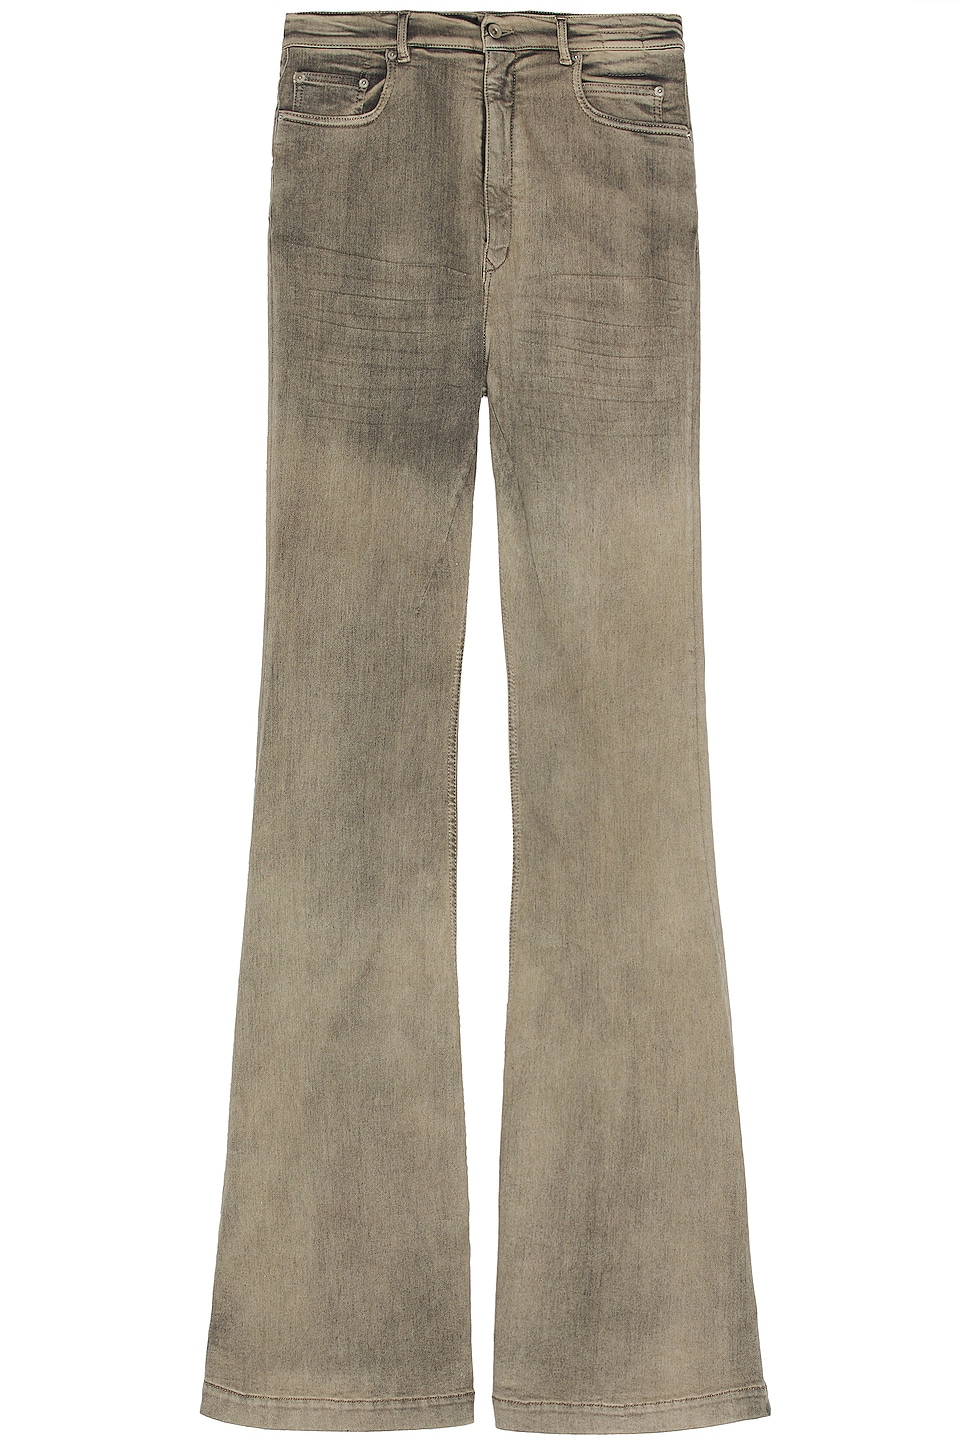 Image 1 of DRKSHDW by Rick Owens Bolan Bootcut Denim Jean in Mineral Pearl